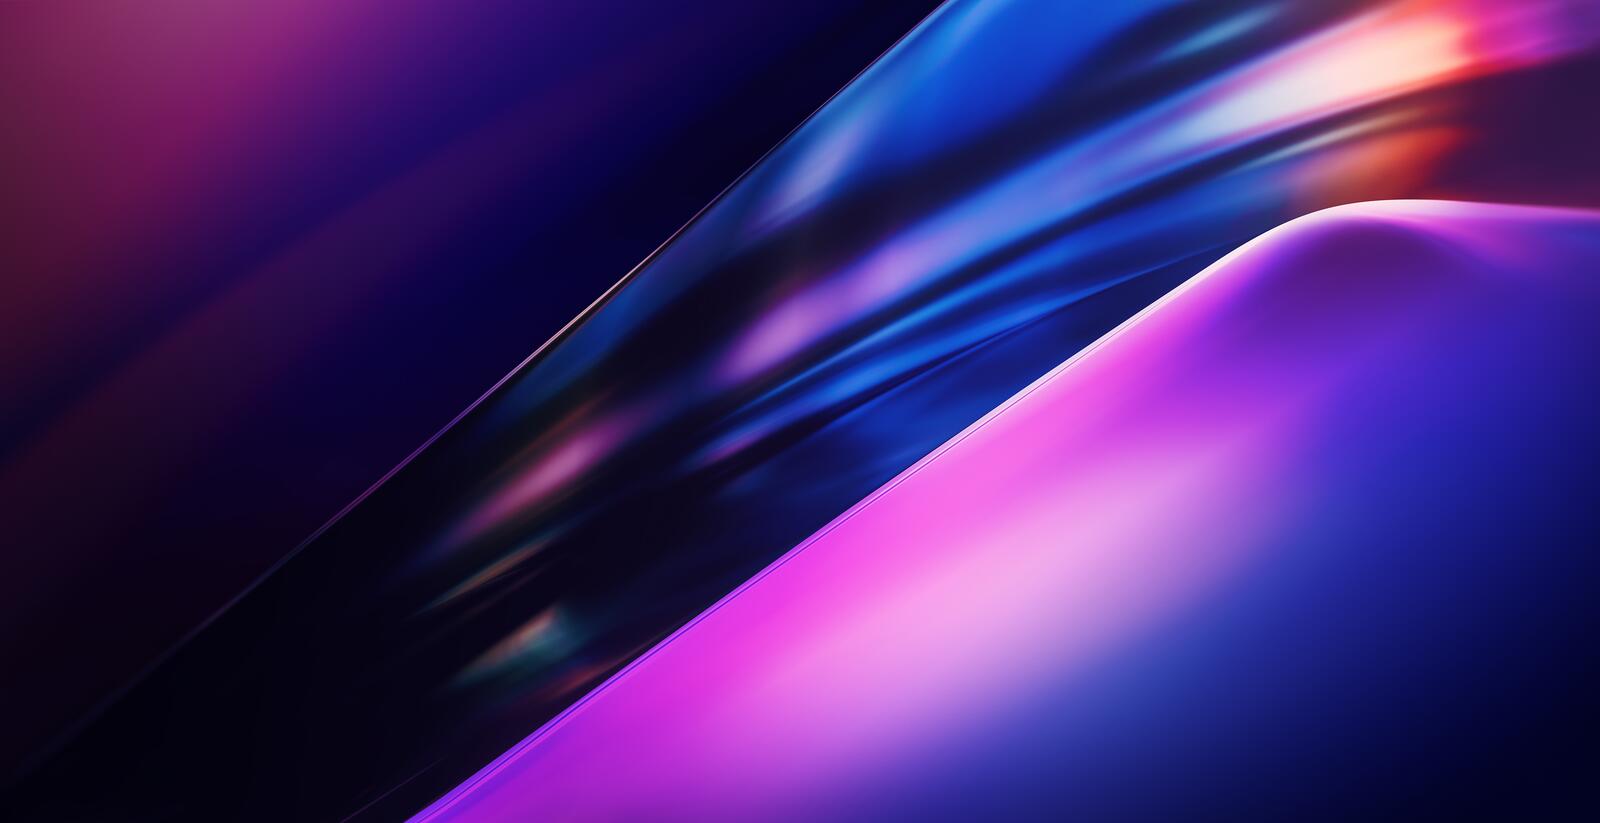 Wallpapers shiny abstraction glowing on the desktop